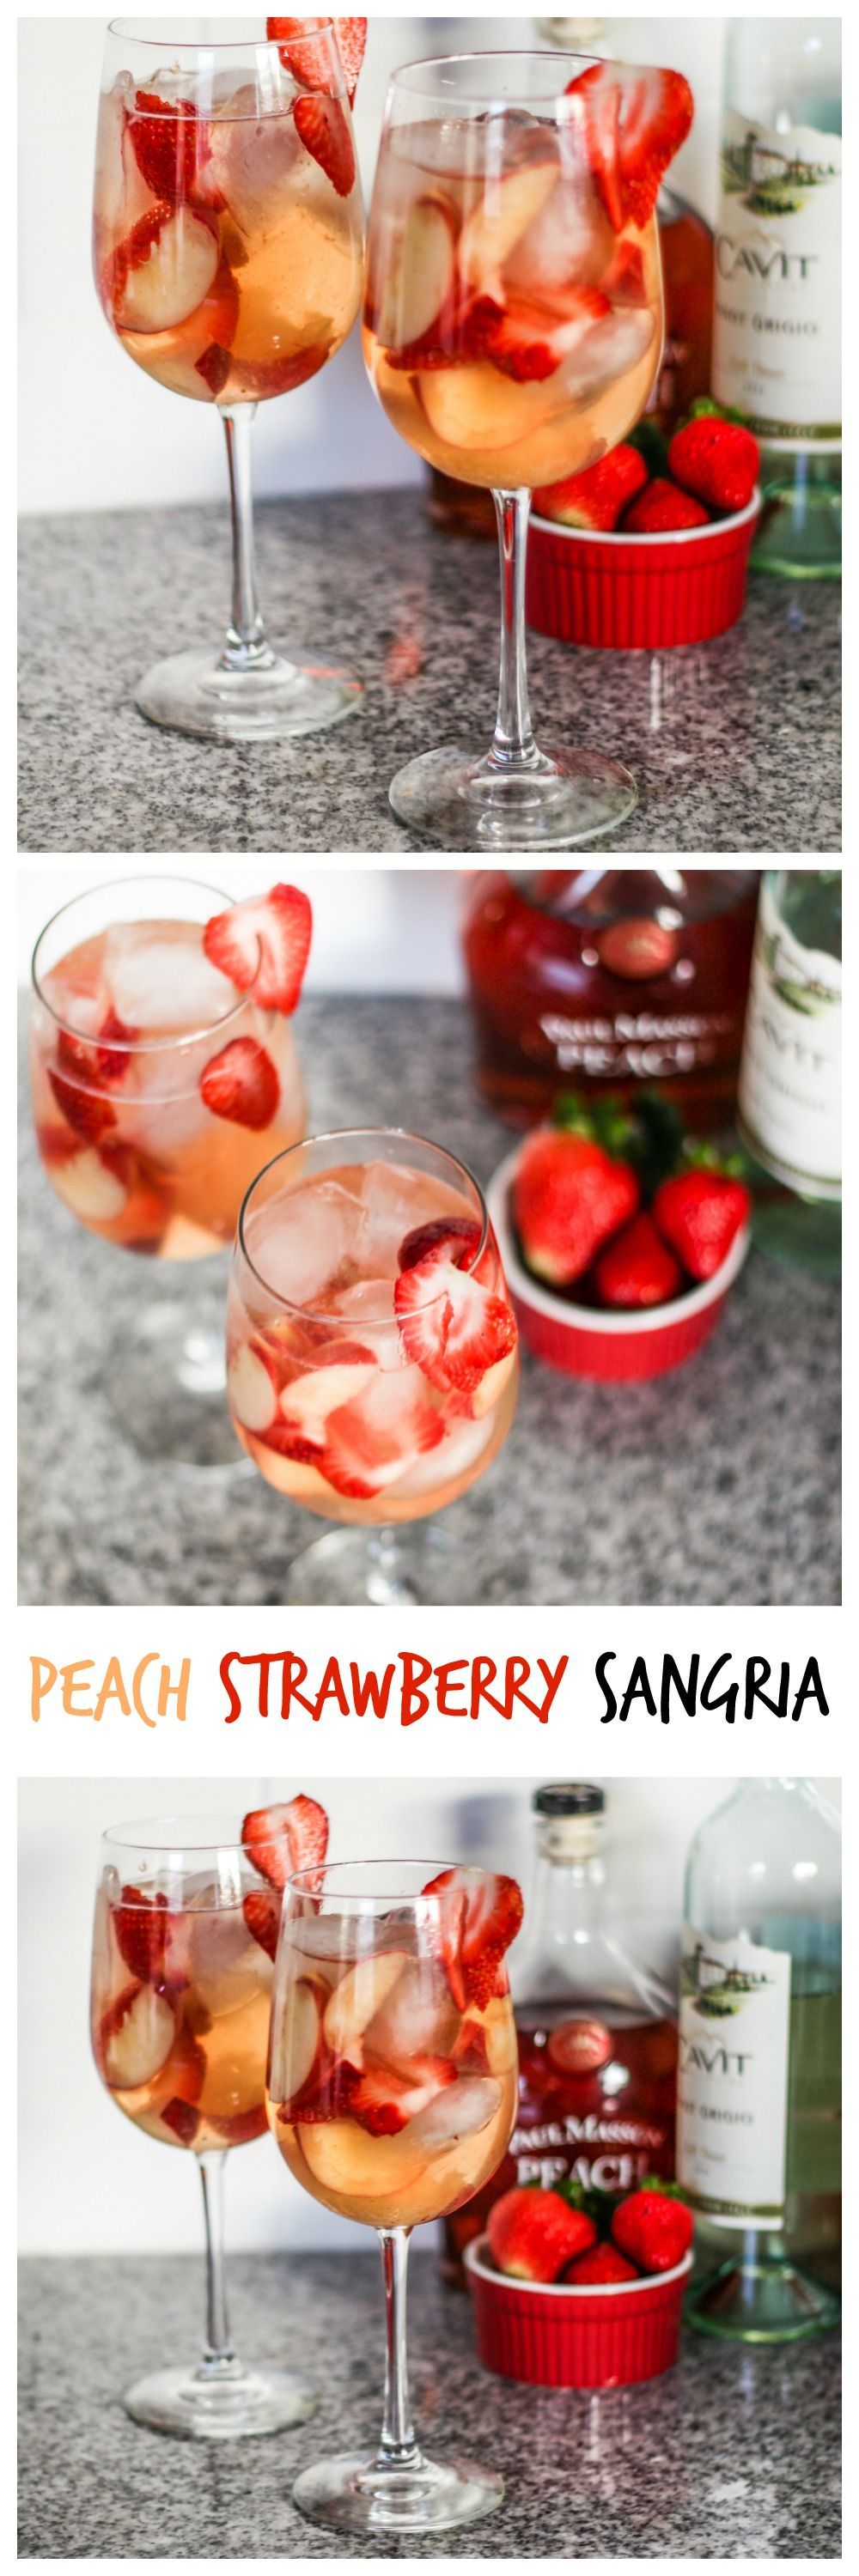 Peach Strawberry Sangria – Perfect summer drink!